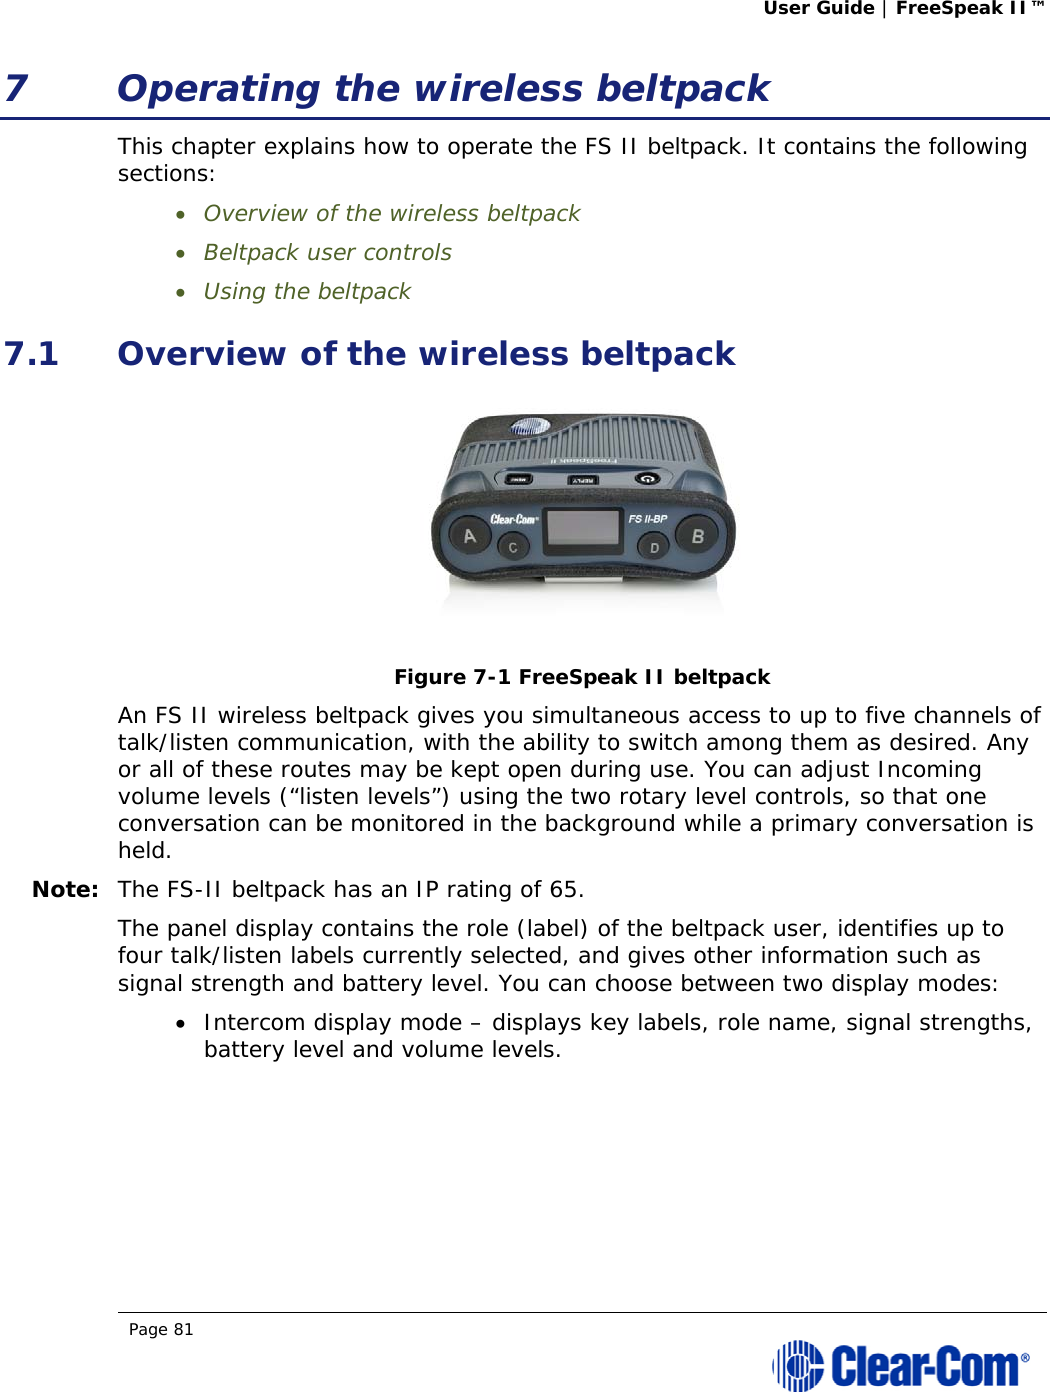 User Guide | FreeSpeak II™  Page 81  7 Operating the wireless beltpack This chapter explains how to operate the FS II beltpack. It contains the following sections:  Overview of the wireless beltpack  Beltpack user controls  Using the beltpack 7.1 Overview of the wireless beltpack  Figure 7-1 FreeSpeak II beltpack An FS II wireless beltpack gives you simultaneous access to up to five channels of talk/listen communication, with the ability to switch among them as desired. Any or all of these routes may be kept open during use. You can adjust Incoming volume levels (“listen levels”) using the two rotary level controls, so that one conversation can be monitored in the background while a primary conversation is held.  Note: The FS-II beltpack has an IP rating of 65. The panel display contains the role (label) of the beltpack user, identifies up to four talk/listen labels currently selected, and gives other information such as signal strength and battery level. You can choose between two display modes:  Intercom display mode – displays key labels, role name, signal strengths, battery level and volume levels. 